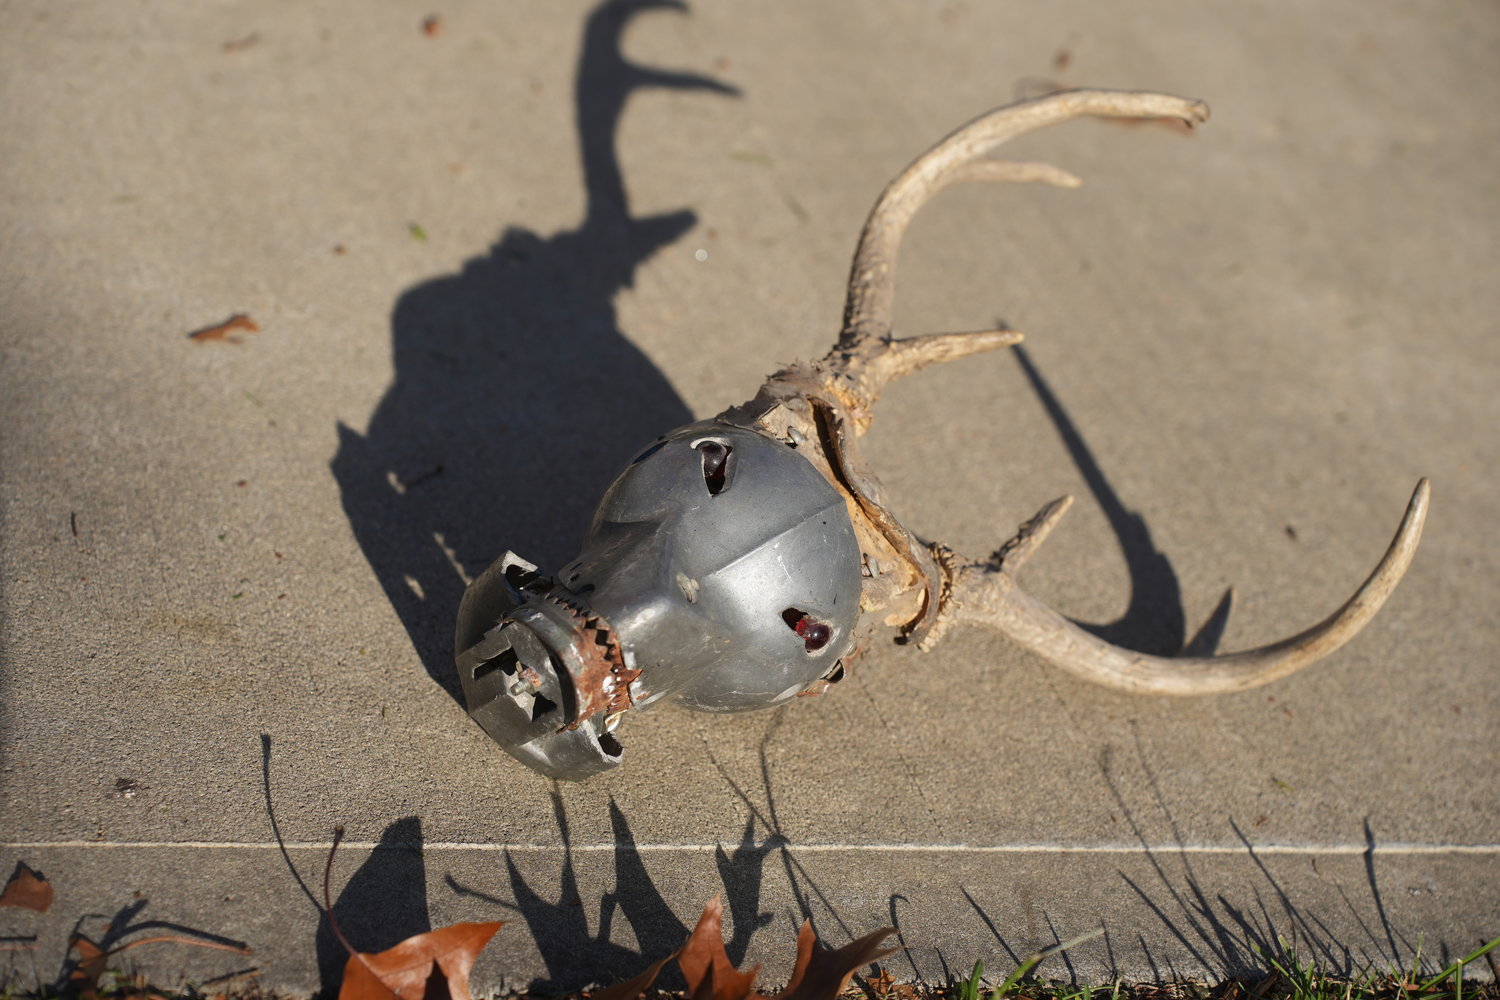 Curt Gray used to work with metal more often, like this metal head with real deer antlers, but eventually he switched to using plastic and stuff he found in junkyards.